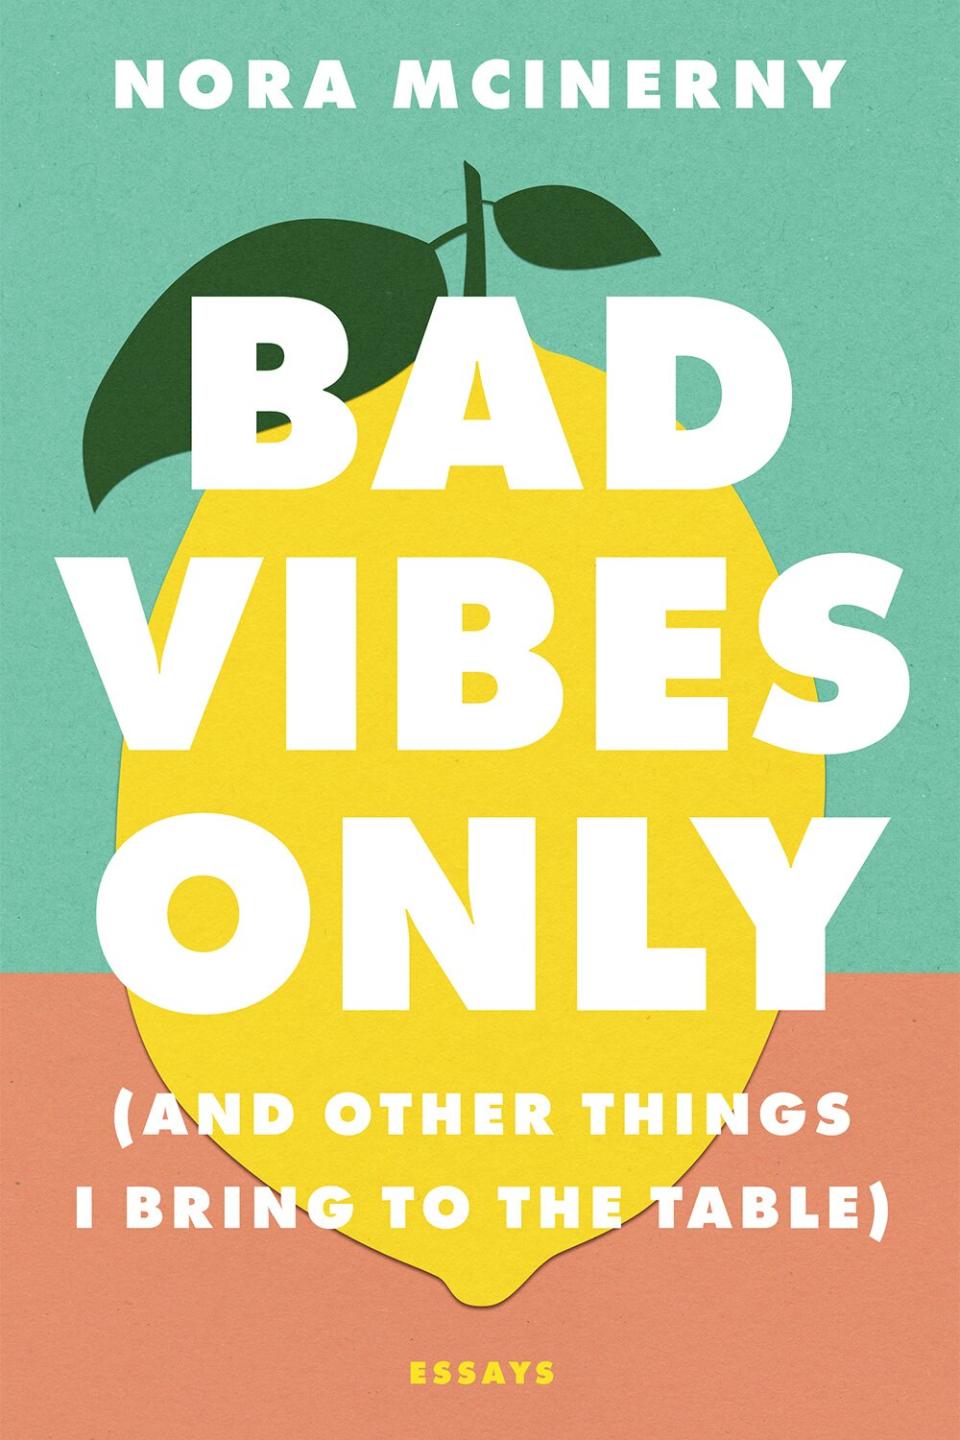 cover of the book "Bad Vibes Only" by Nora McInerny